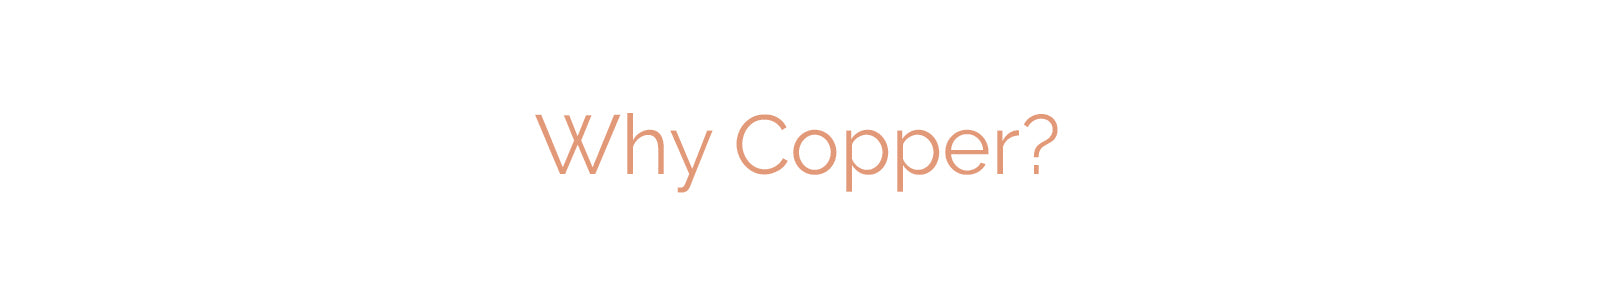 Why Copper? Copper and Health Benefits-Copper and the Home-Antimicrobial Copper-Copper Interior-Copper Health by Proper Copper Design